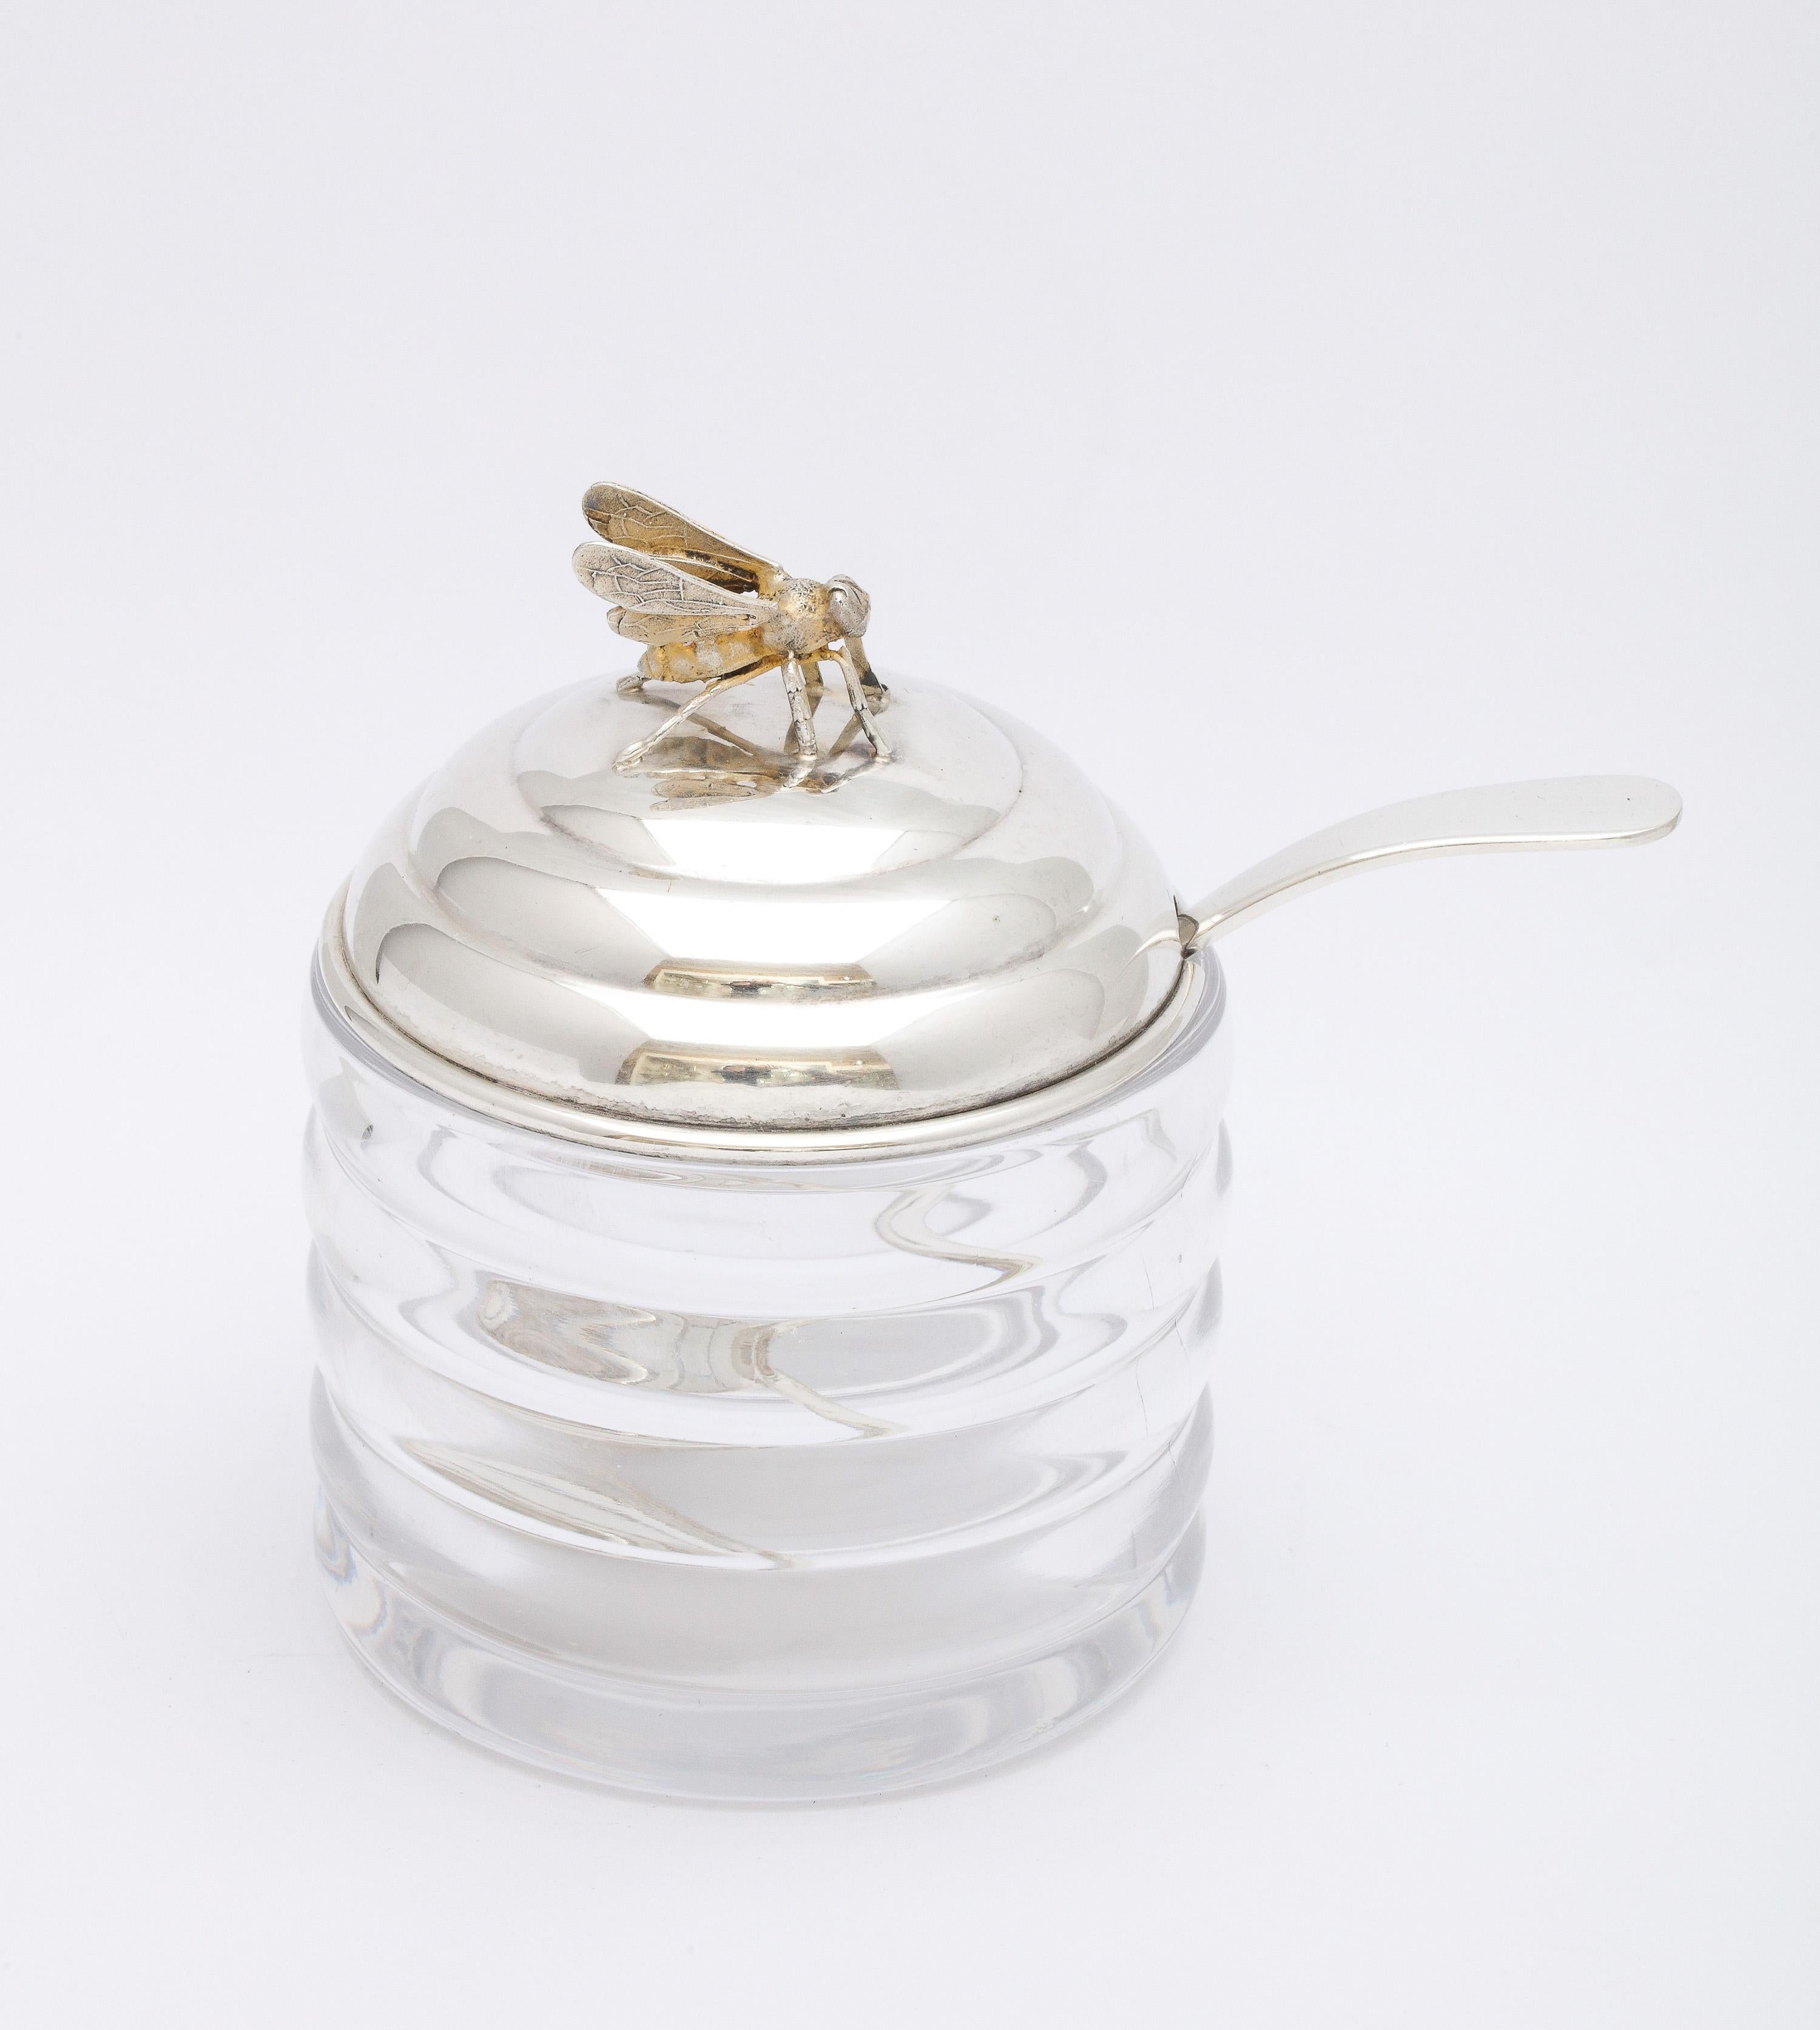 Unusual, Art Deco period, sterling silver-mounted, beehive-form honey jar, with its original sterling silver honey spoon, R. Blackinton and Co., North Attleboro, Mass., Ca. 1930's. Glass honey jar is in the form of a beehive. Sterling silver lid is